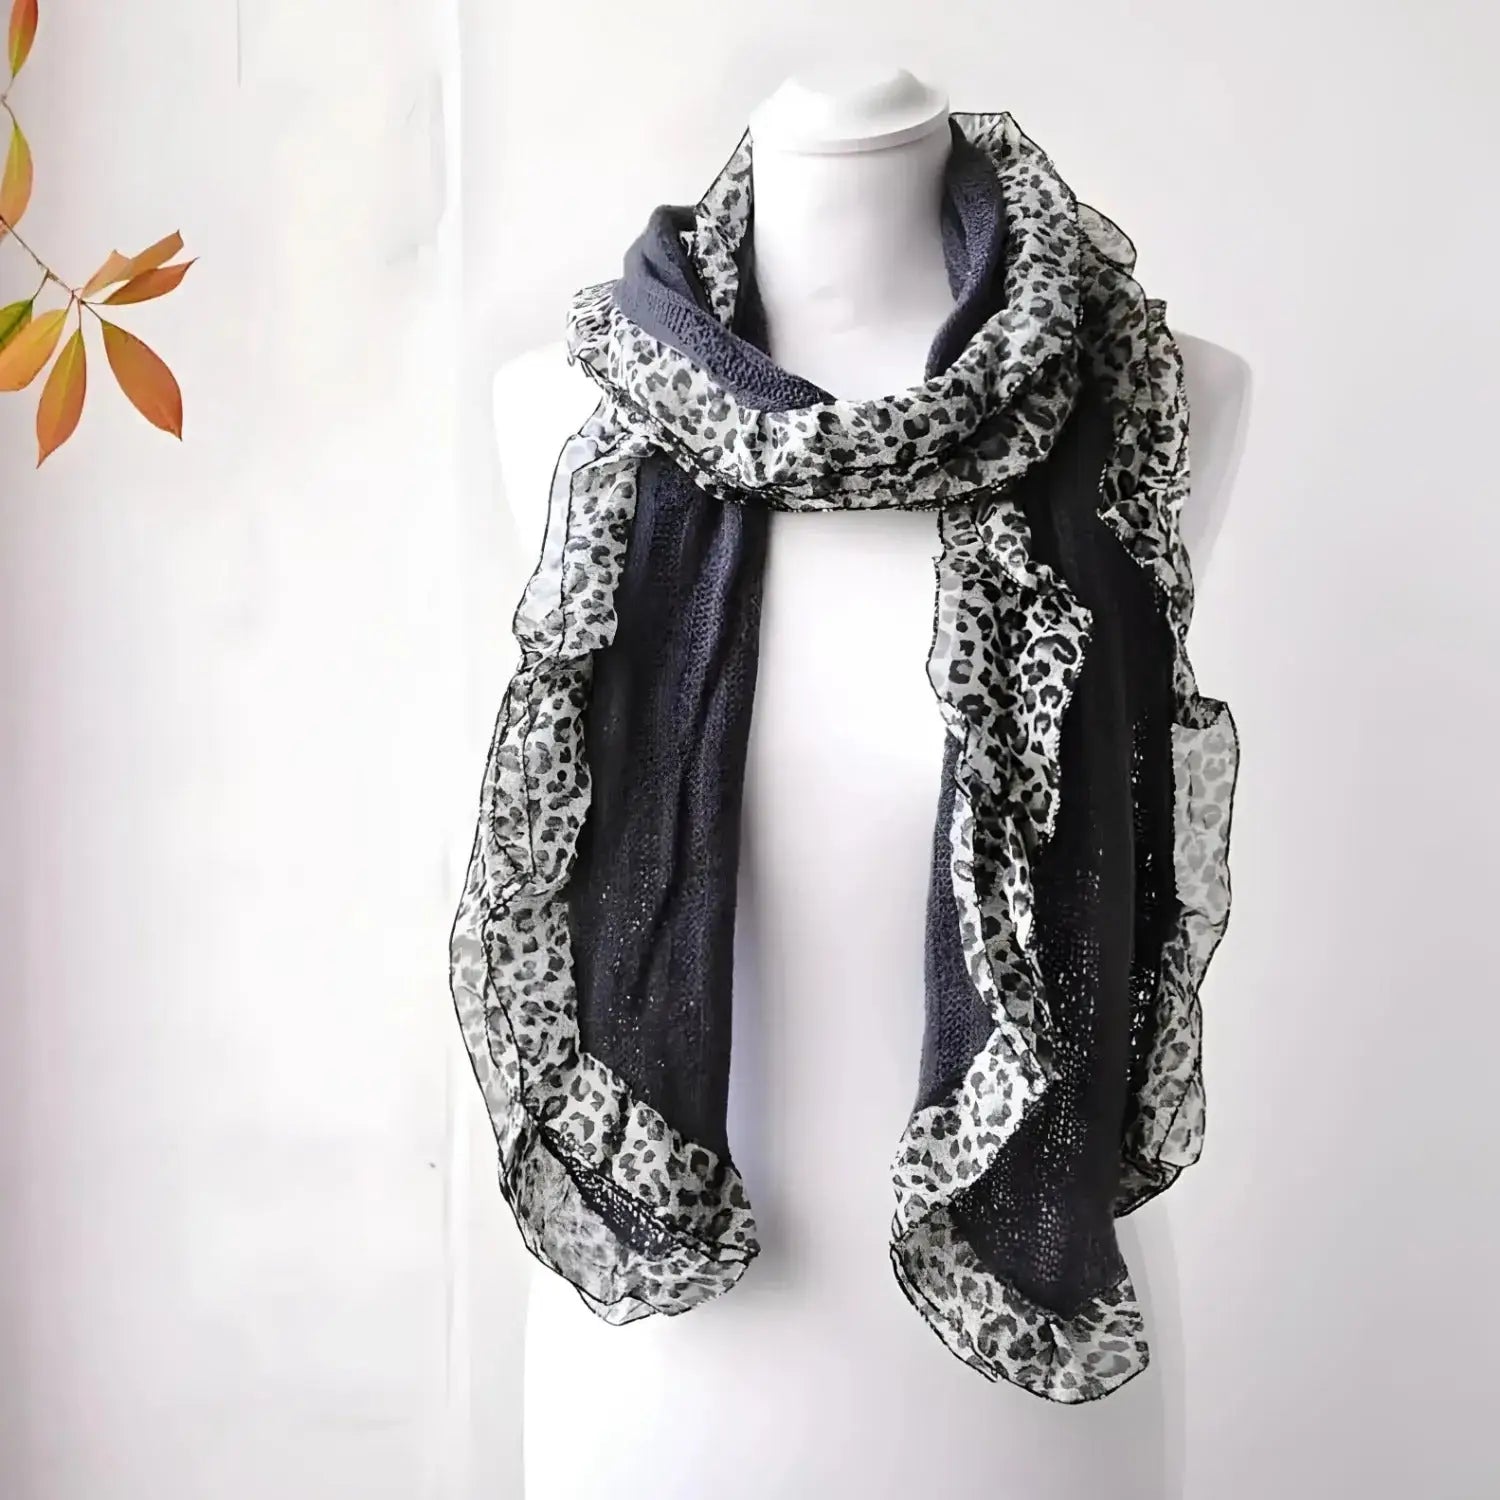 Ruffle leopard print knitted scarf in black and white leopard design